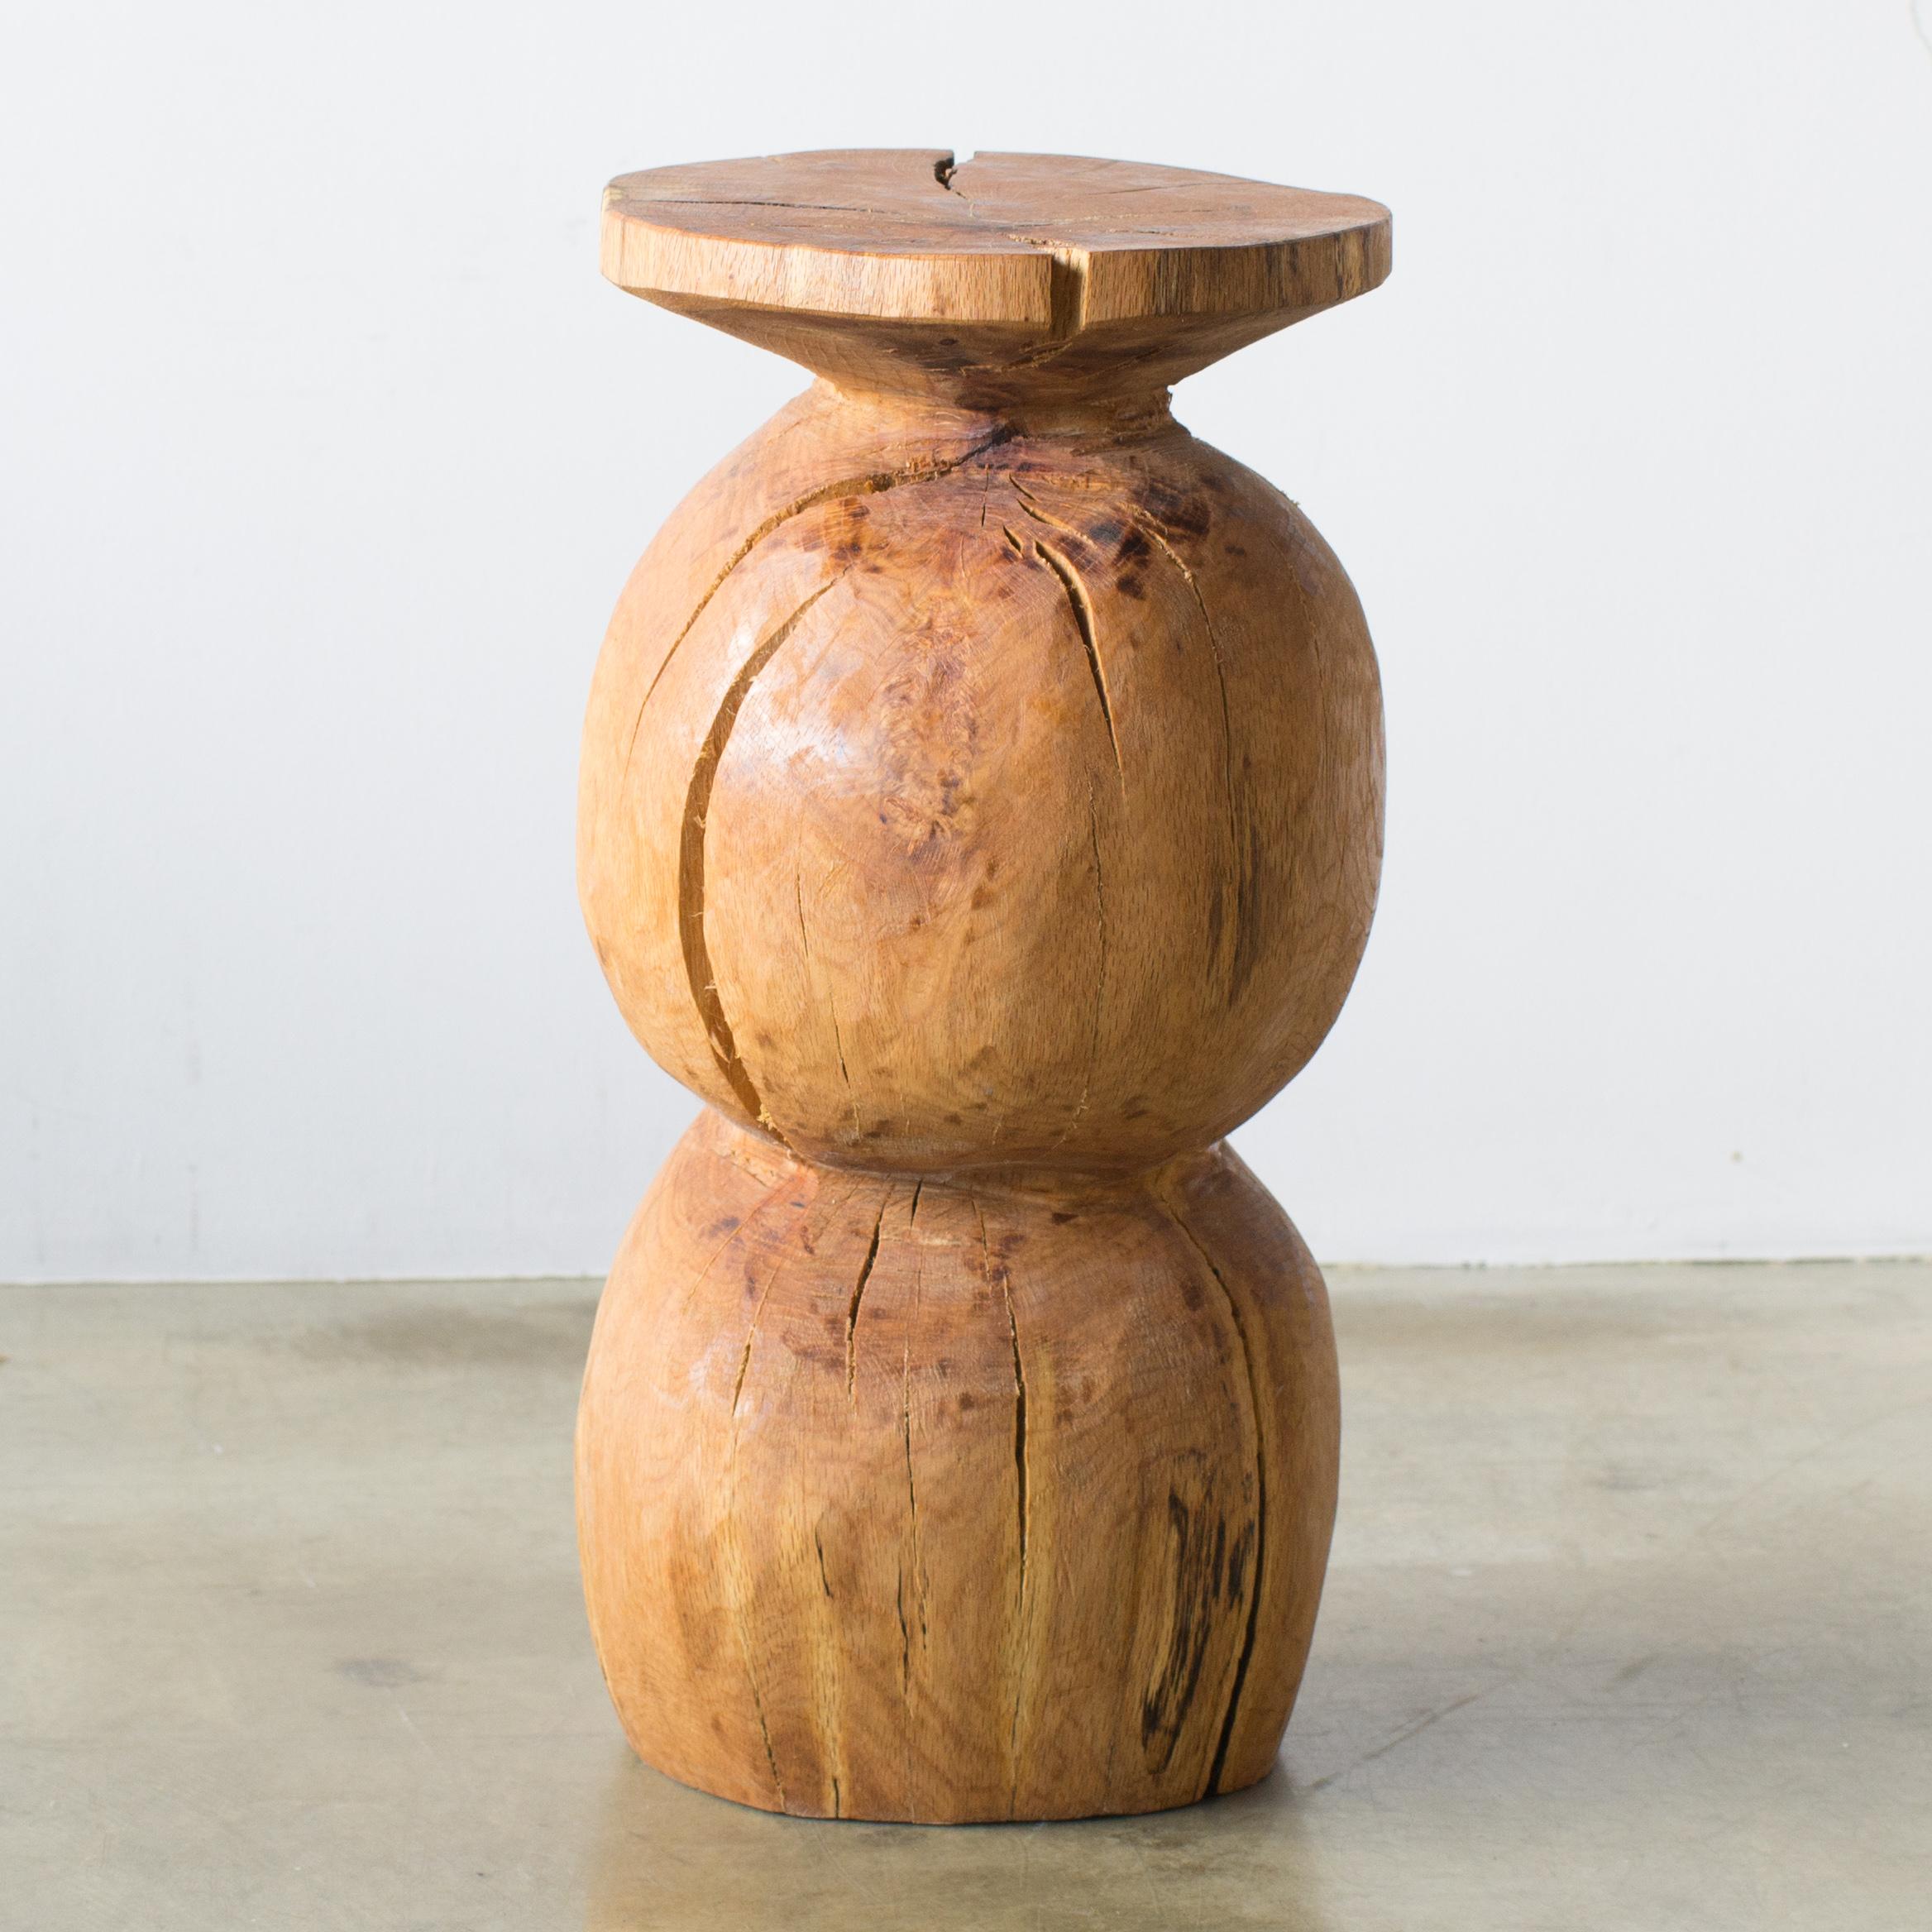 Mamma
Sculptural stool by Hiroyuki Nishimura and zone carved furniture
Material zelkova.
This work is carved from log with some kinds of chainsaws.